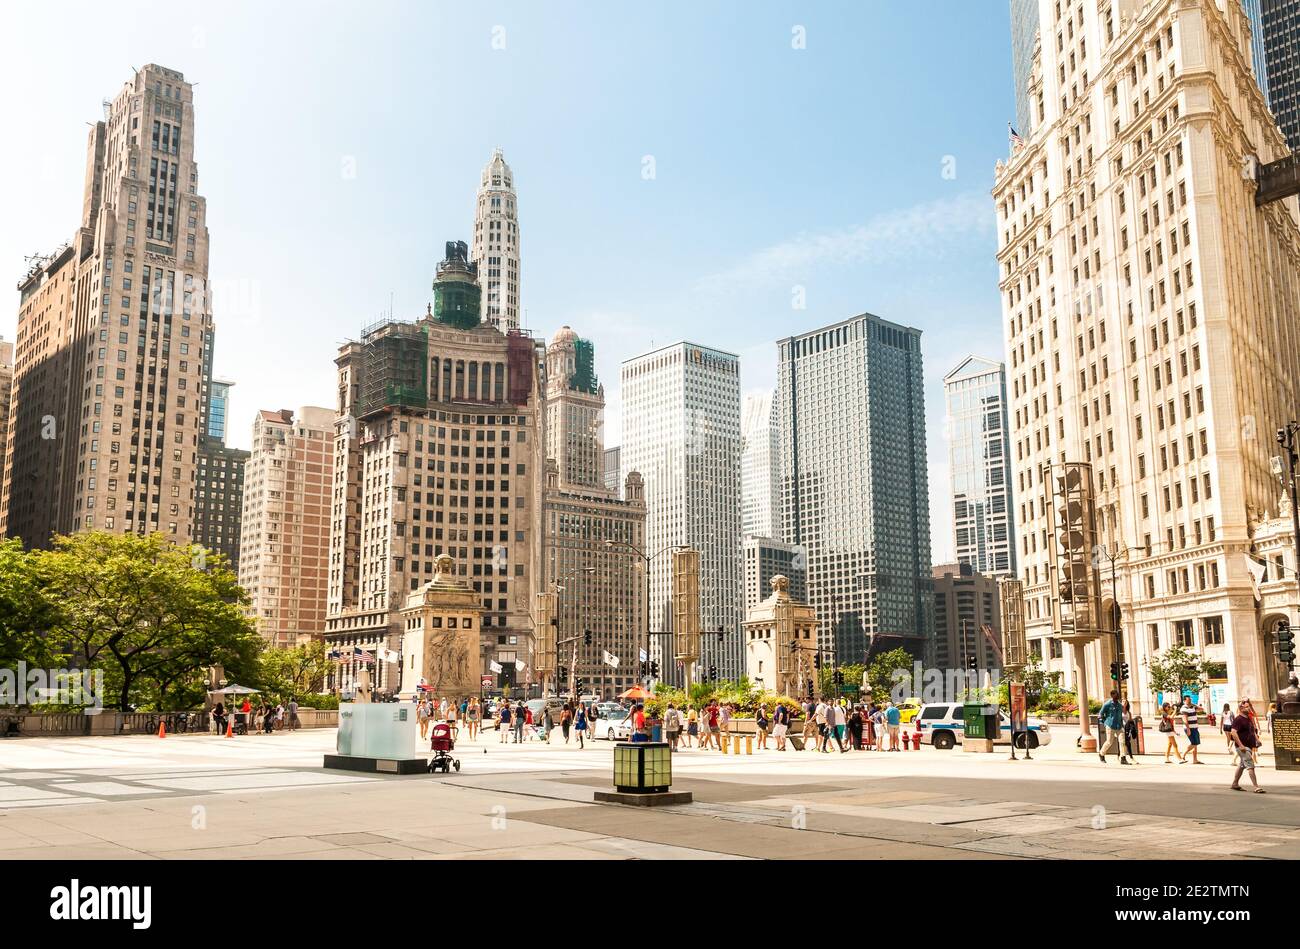 Chicago, Illinois, USA - August 24, 2014: Urbane scenery of Chicago Downtown. Urban landscape with towers and skyscrapers in a summer day. Stock Photo